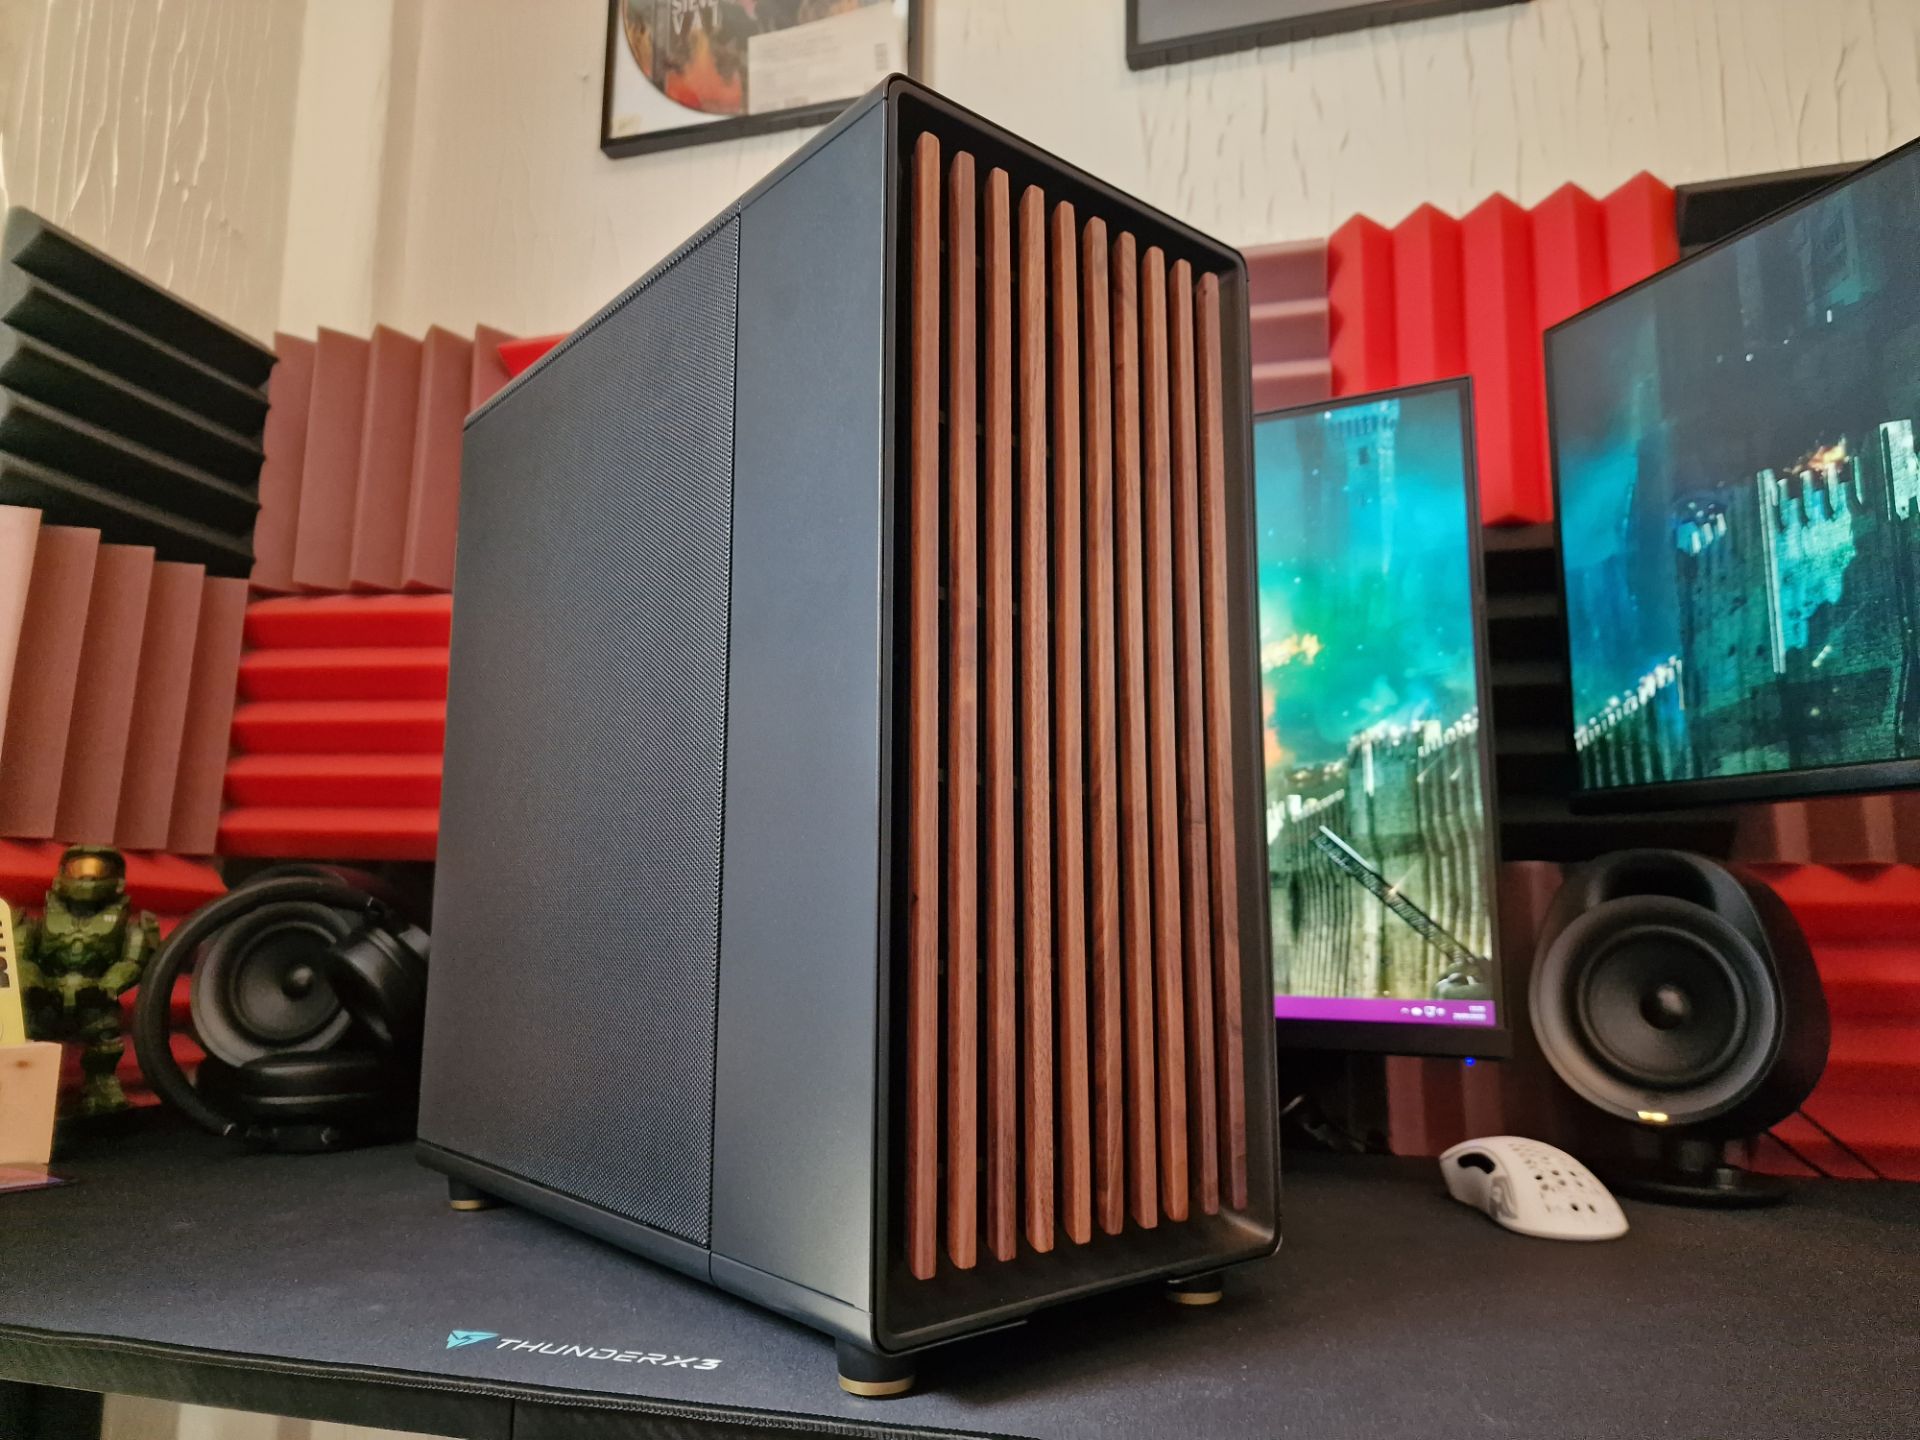 You Will Fall in Love, Fractal Design North Gaming PC Build